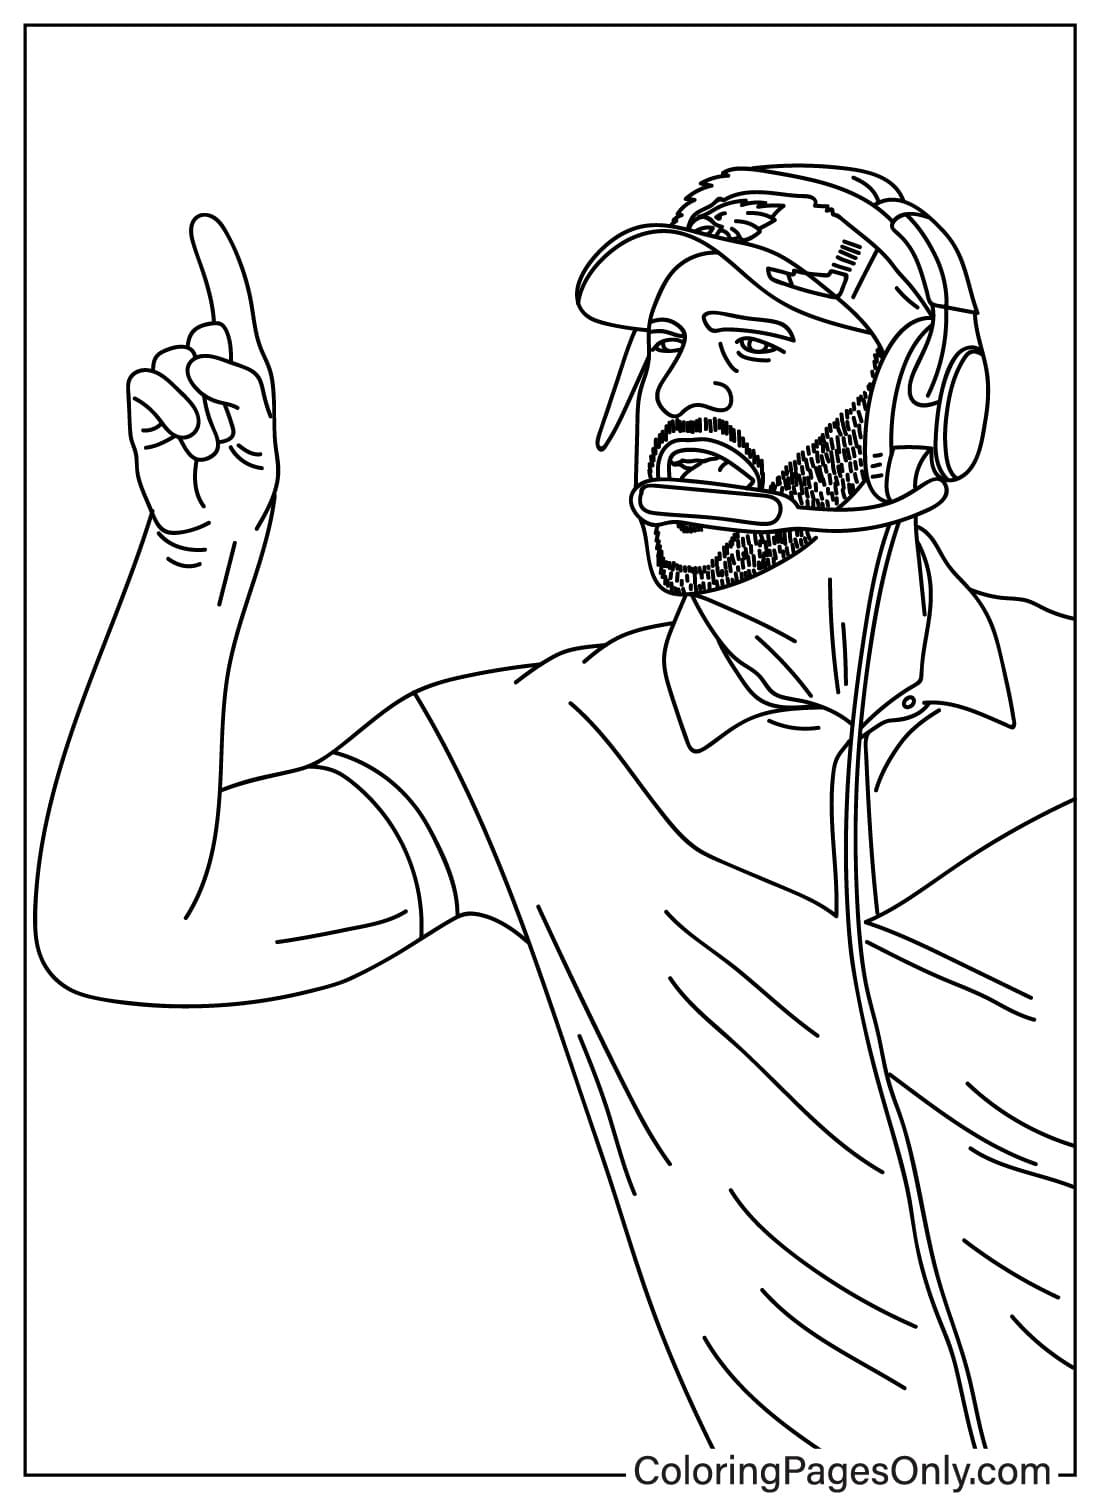 Nick Sirianni Coloring Page from Philadelphia Eagles